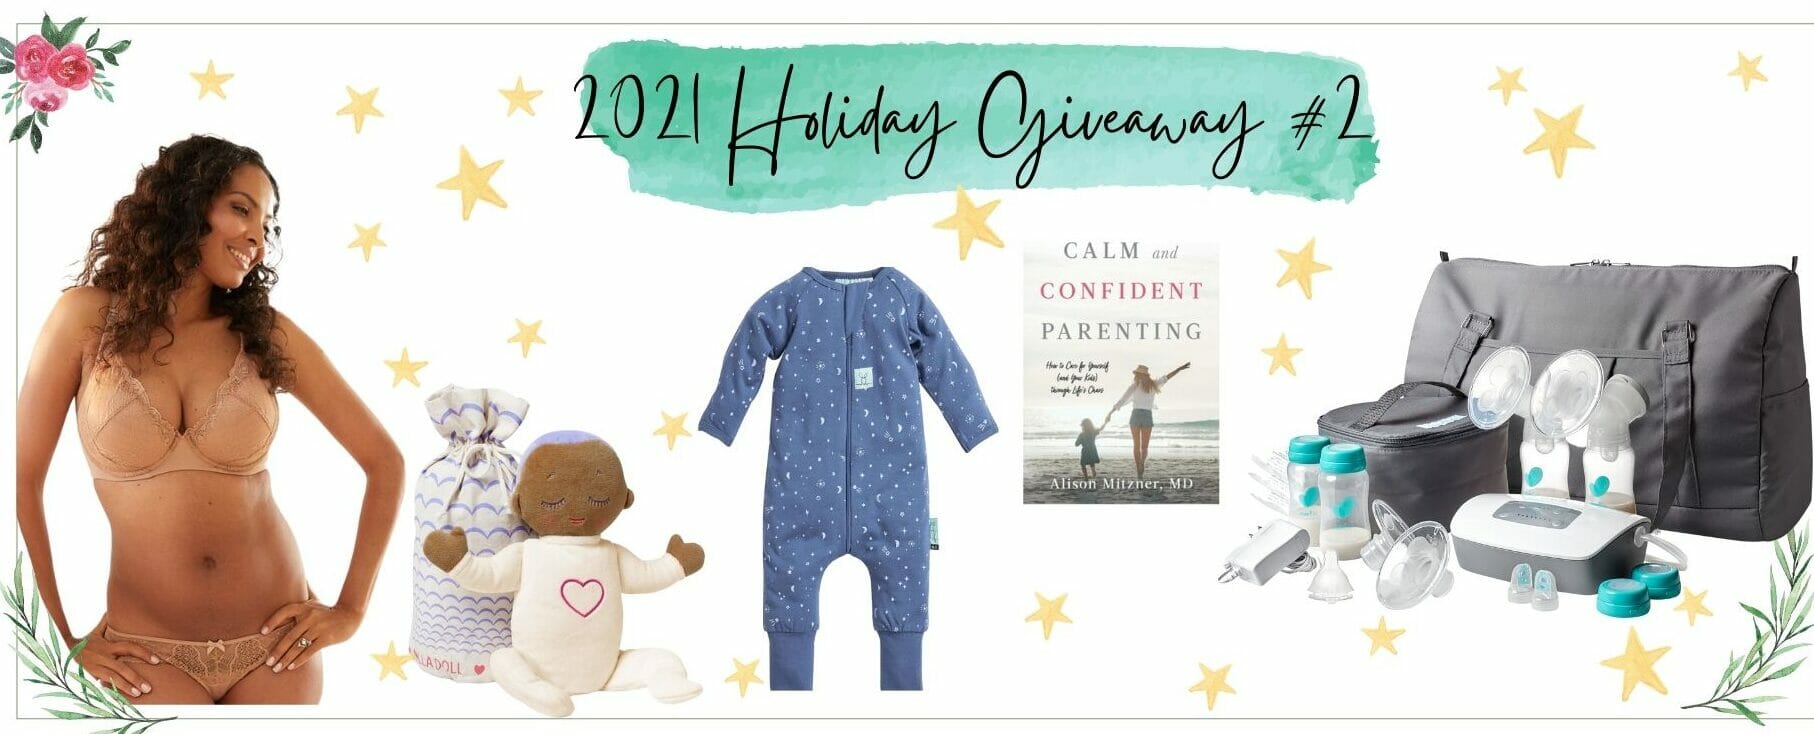 2021 gift guide giveaway 2